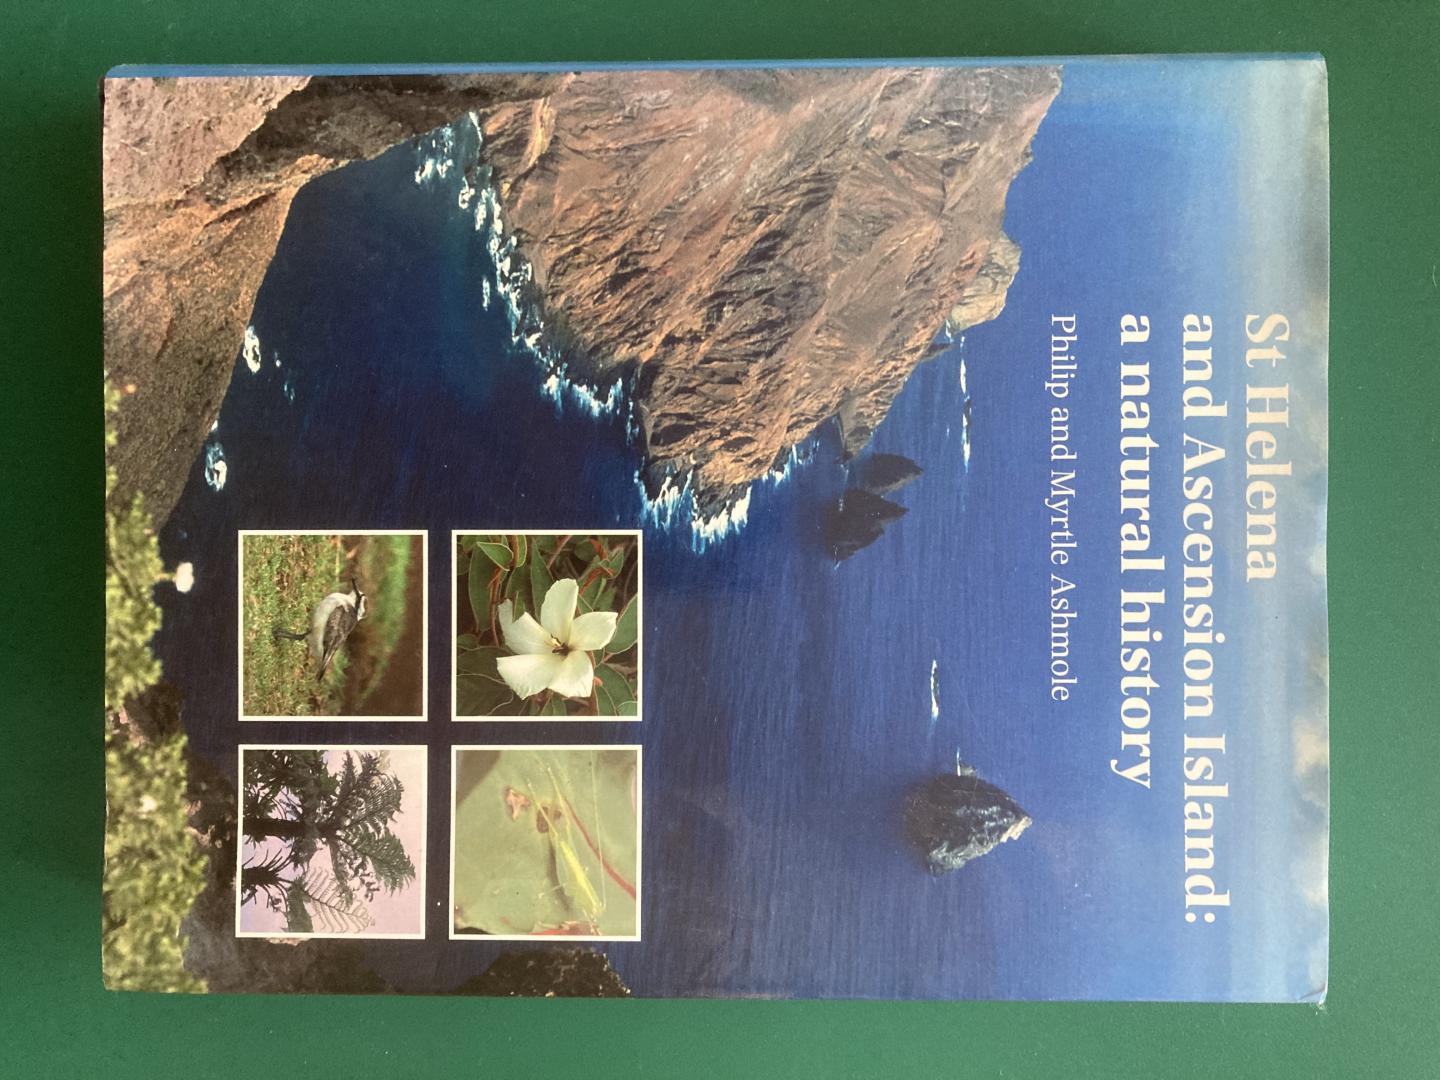 Ashmole, Philip and Myrtle - St. Helena and Ascension Island a natural History